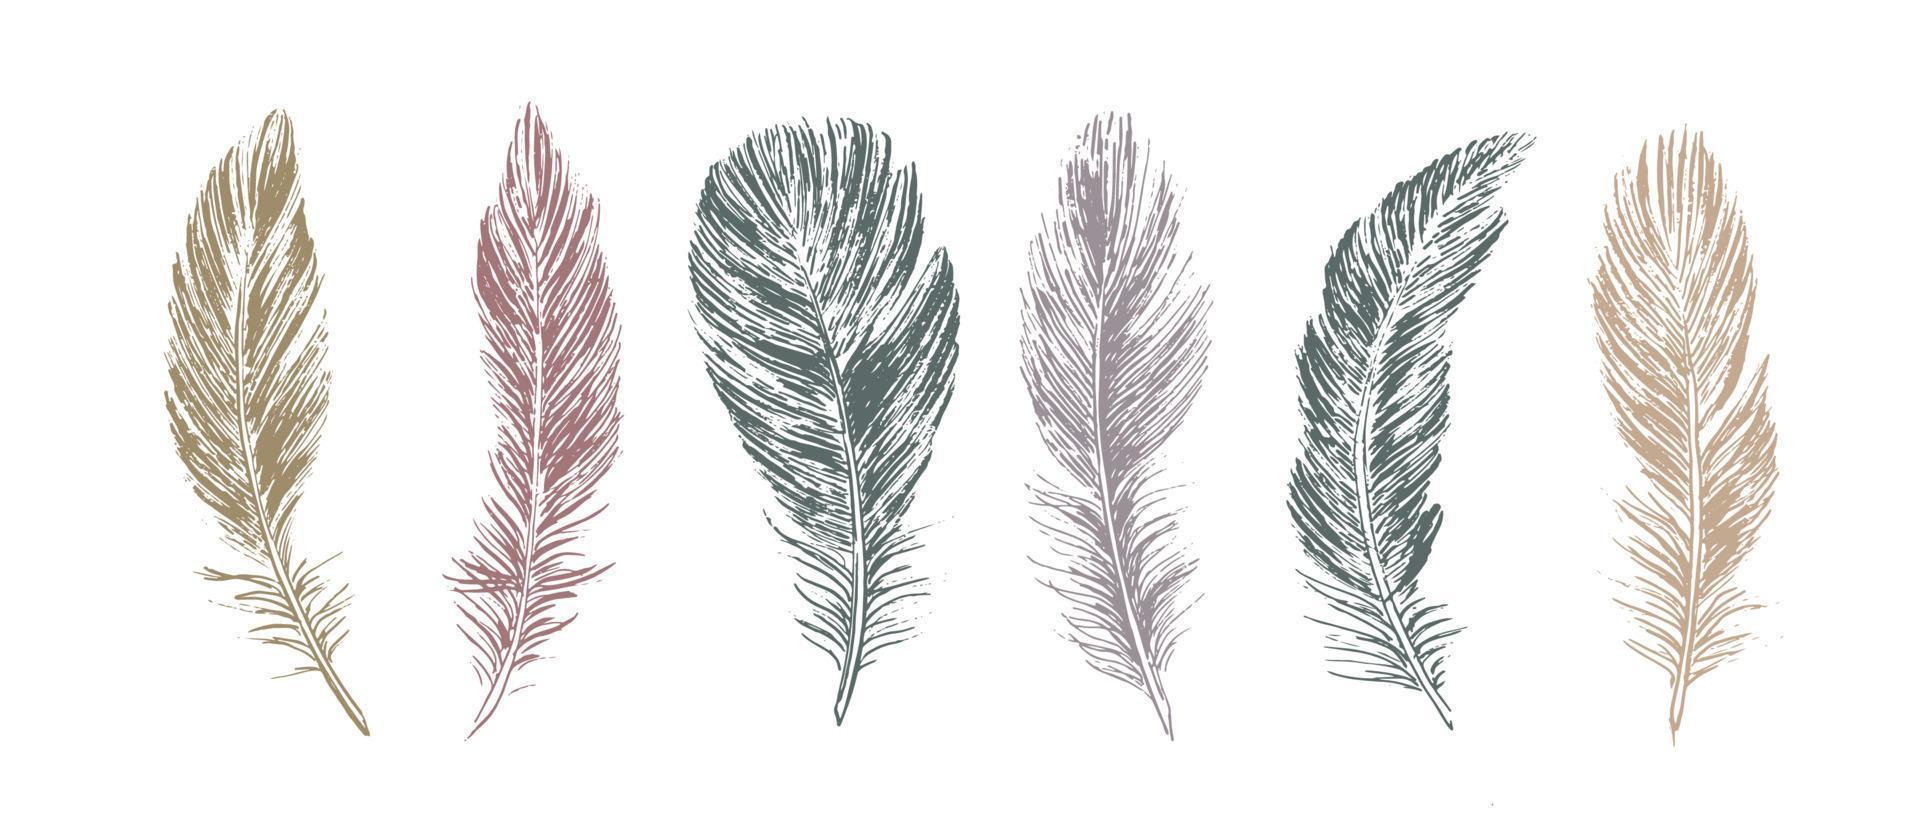 Feathers set on white background. Hand drawn sketch style. vector